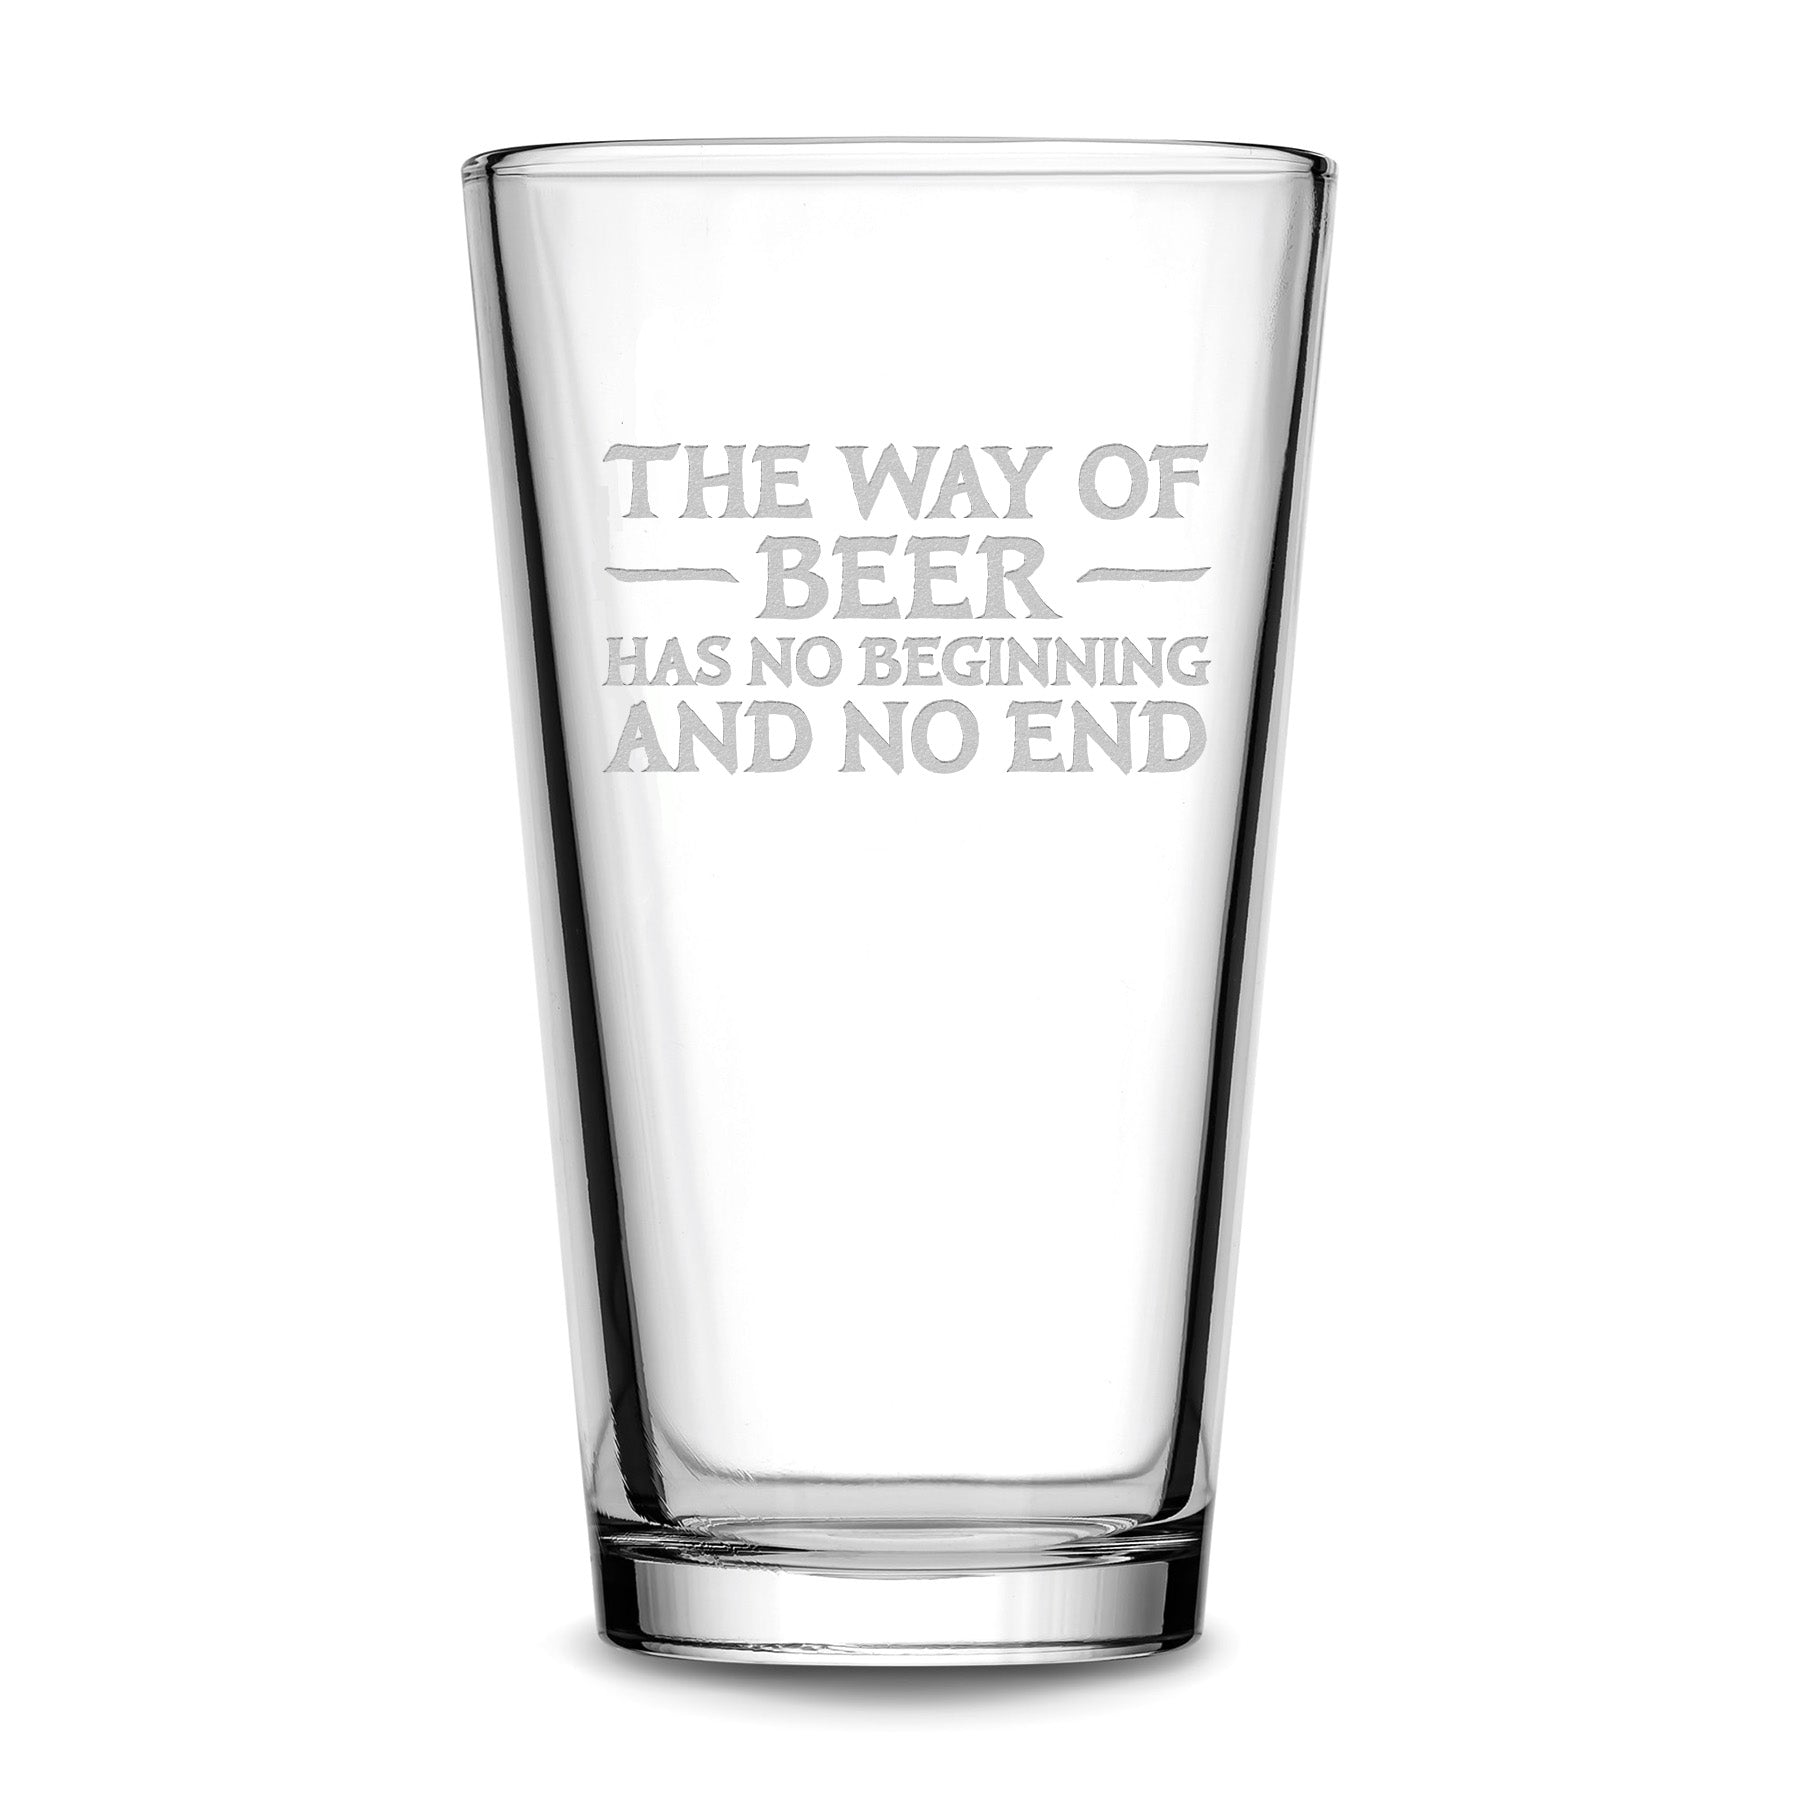 Premium Pint Glass, Avatar Way of Beer, 16oz, Laser Etched or Hand Etched